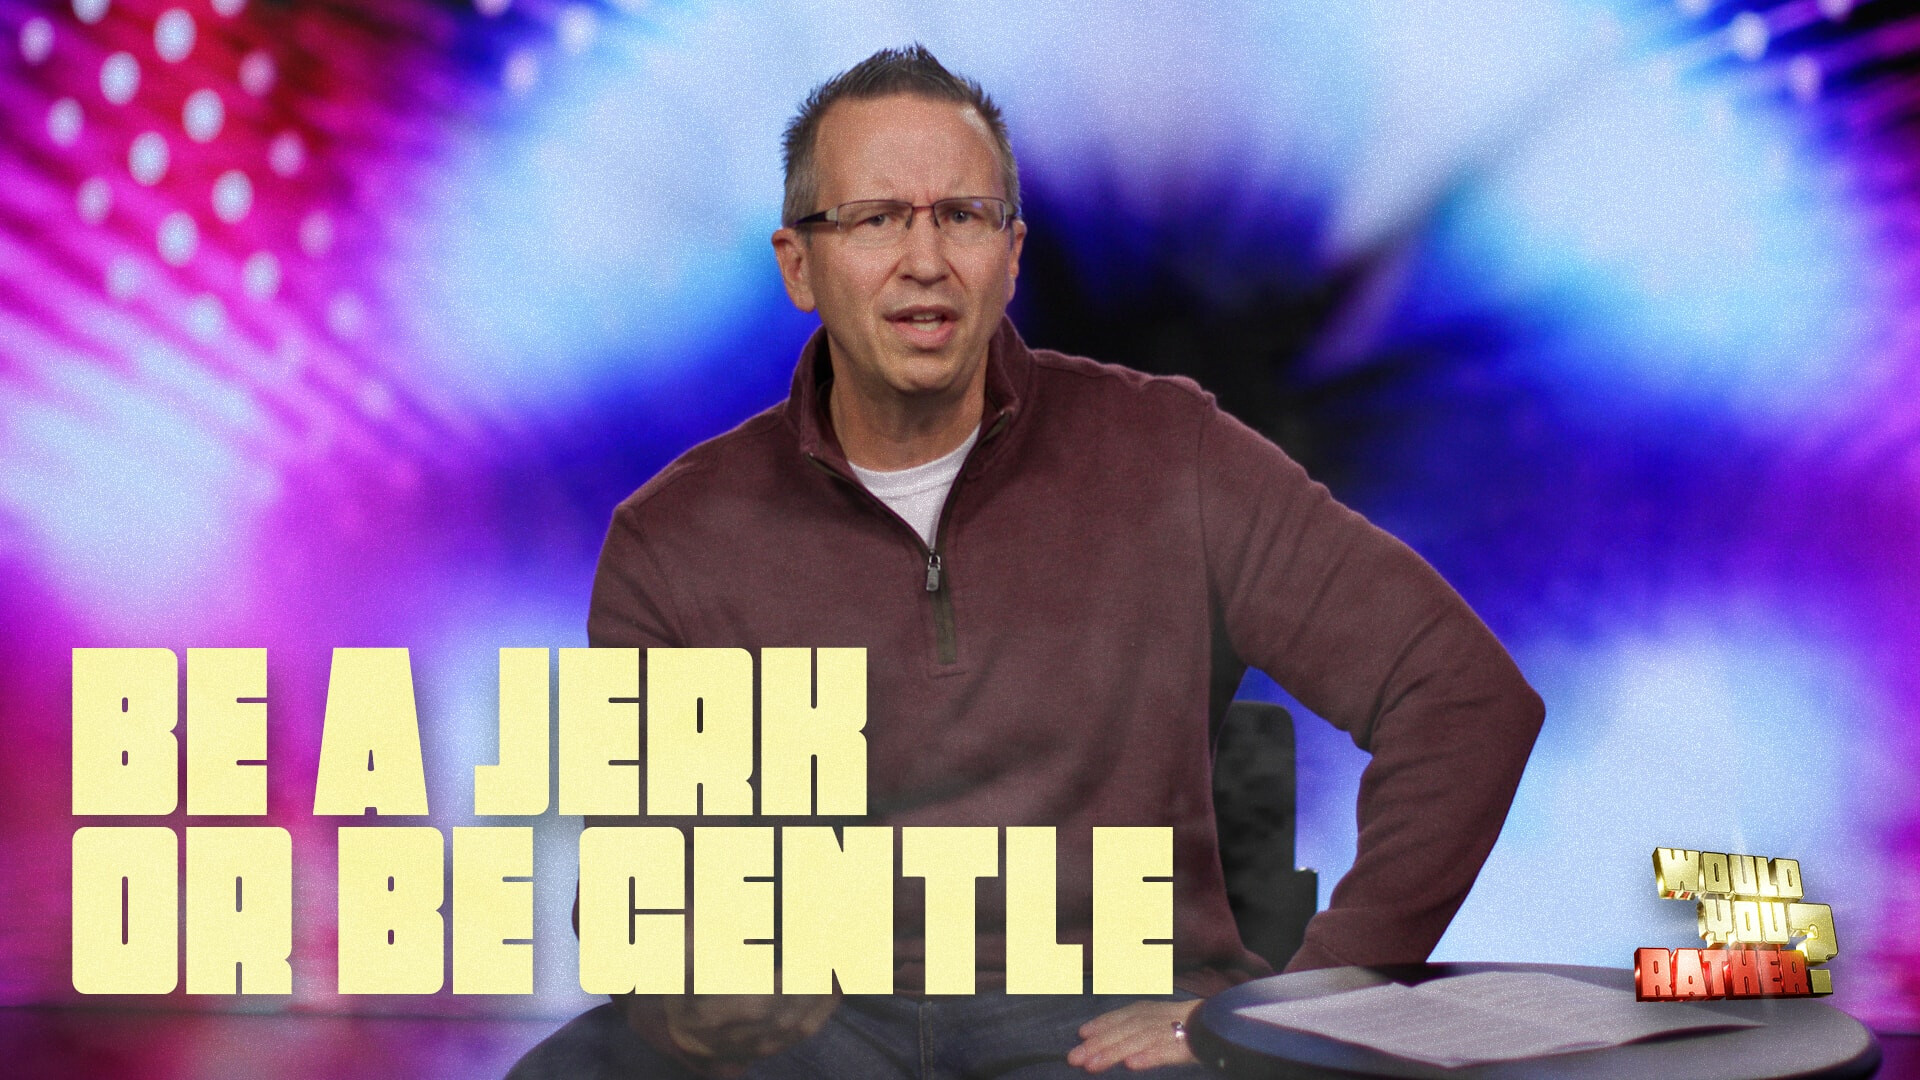 Watch Would You Rather - Be a Jerk or Be Gentle?